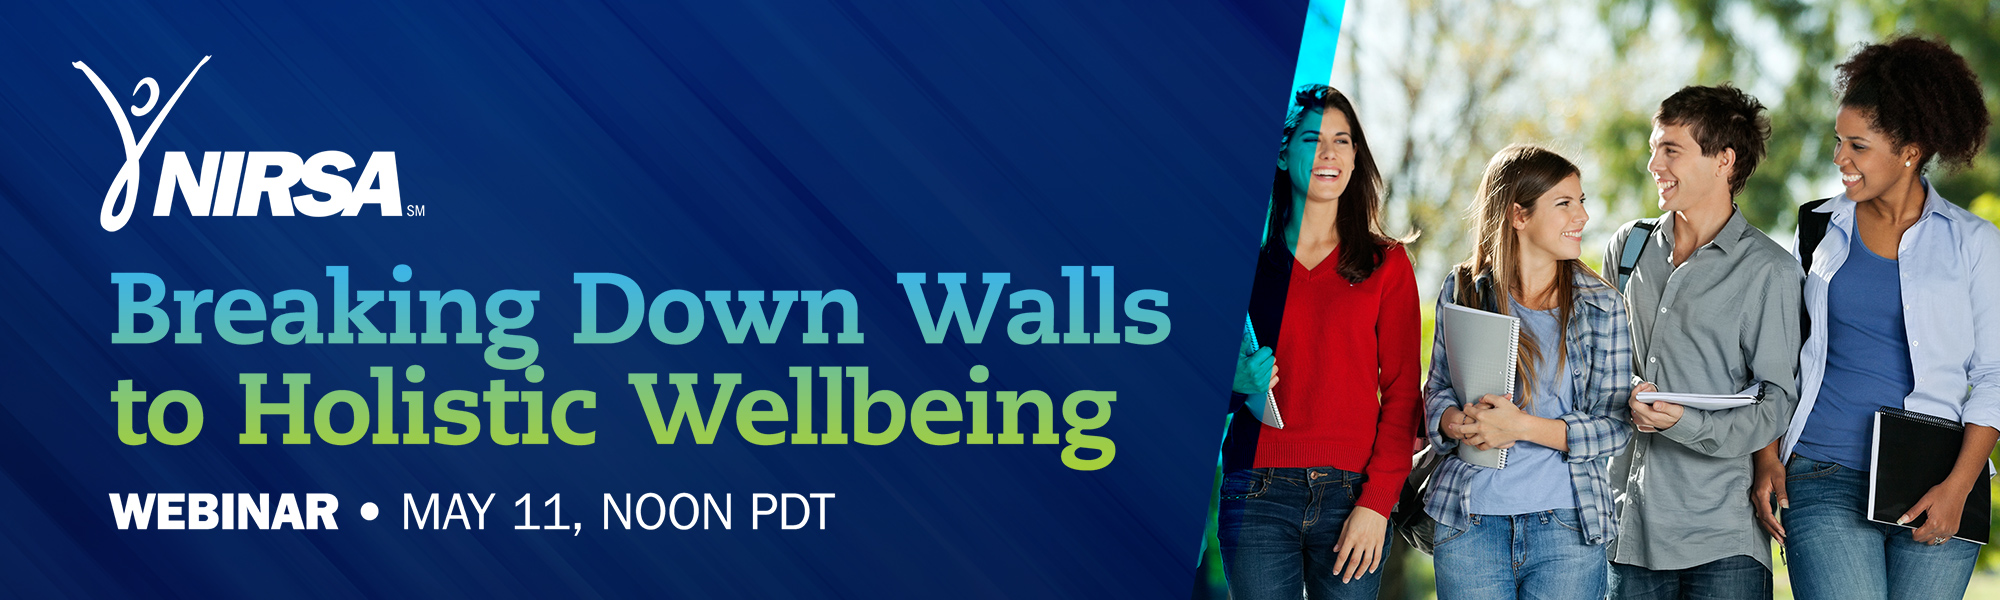 Breaking Down Walls to Holistic Wellbeing